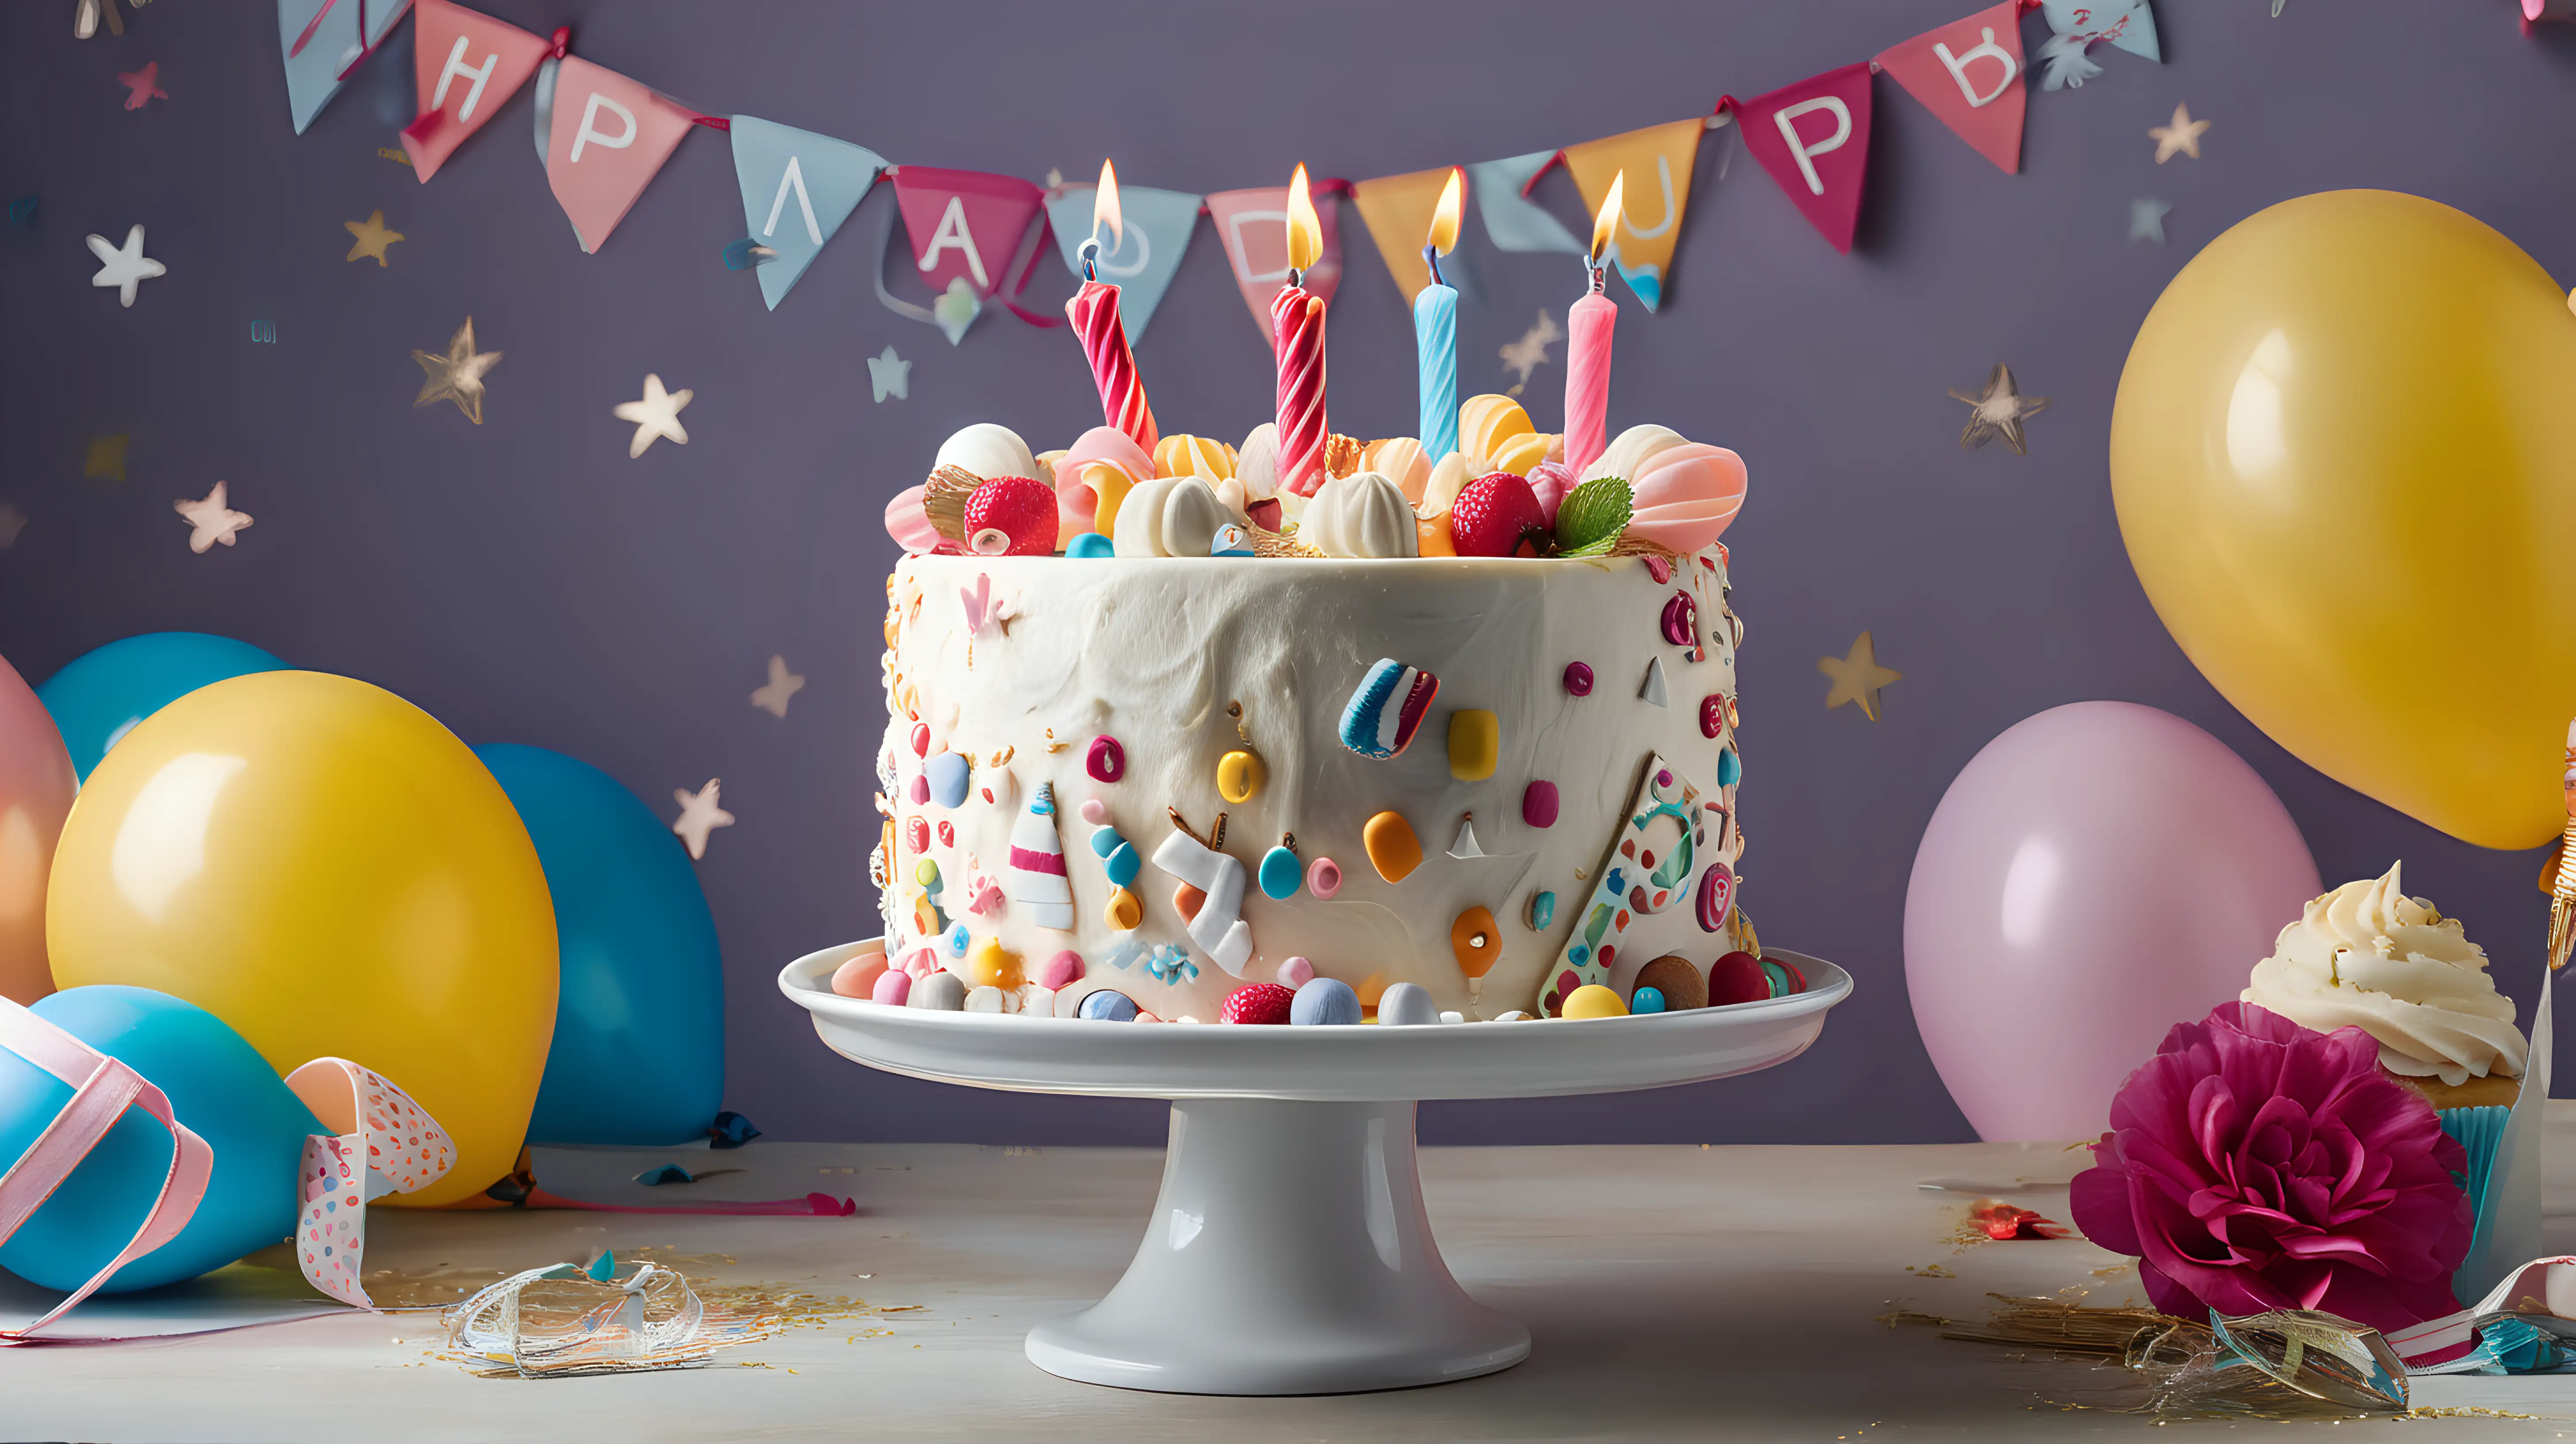 Play with perspective to capture unique angles of the birthday cake and decorations, adding visual interest and depth to the images.